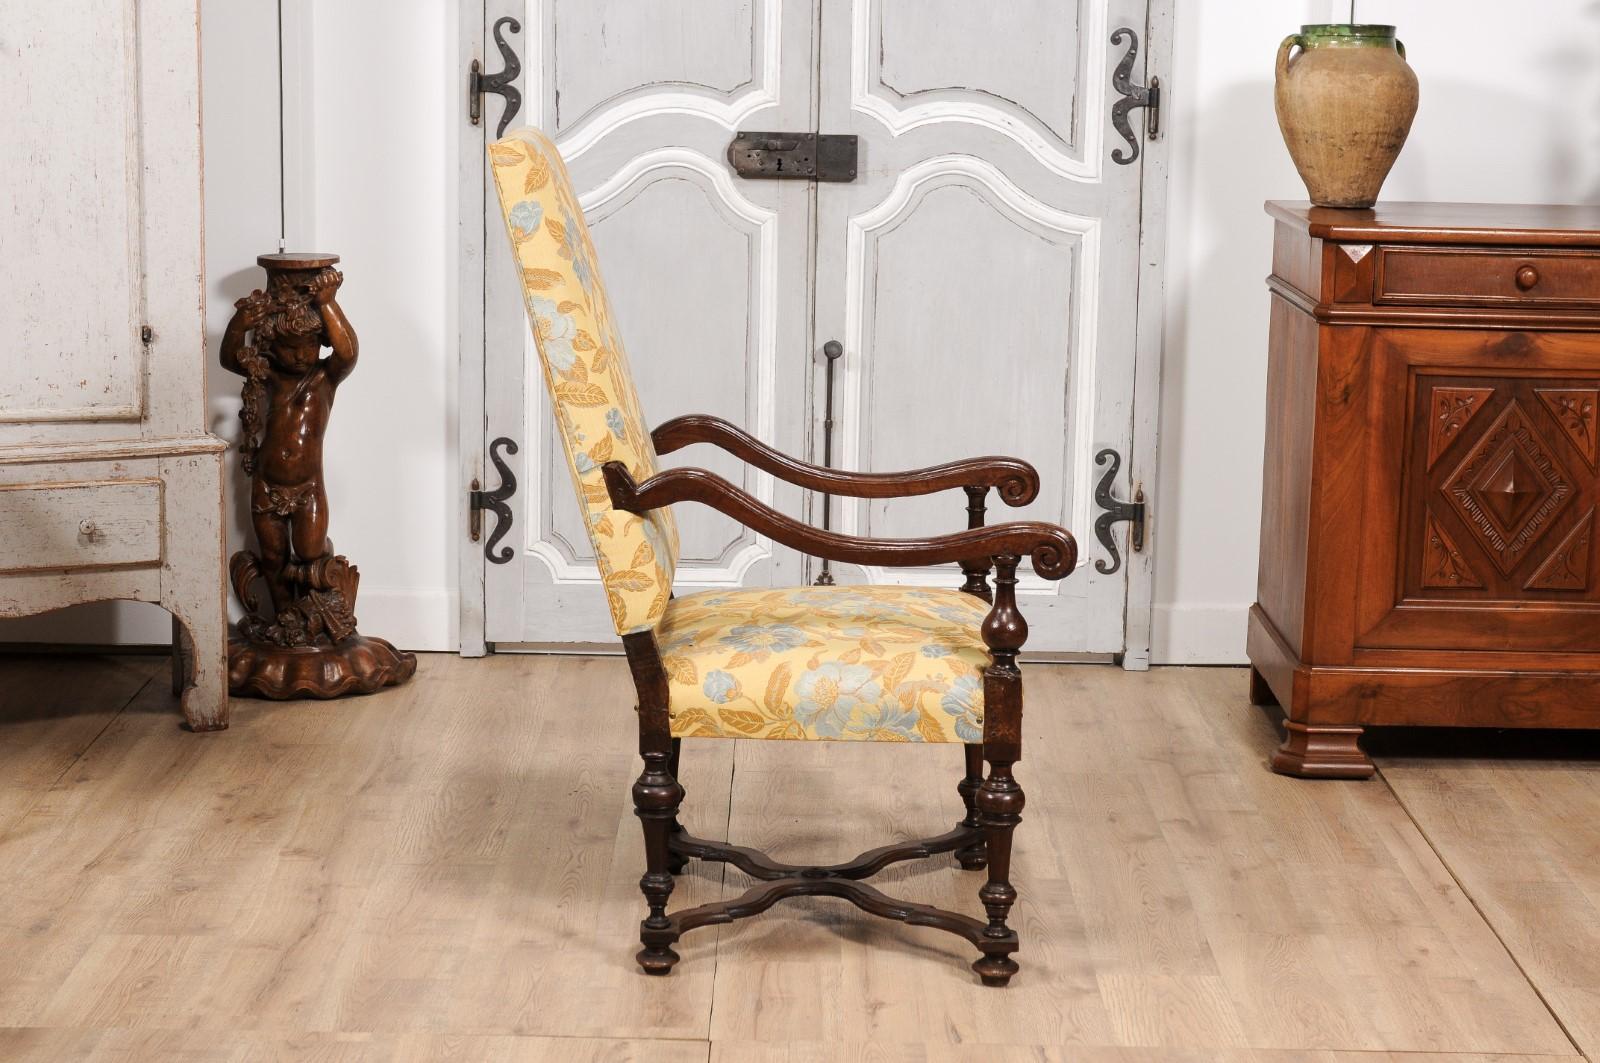 Italian Baroque Period 17th Century Walnut Armchair with Carved X-Form Stretcher For Sale 2